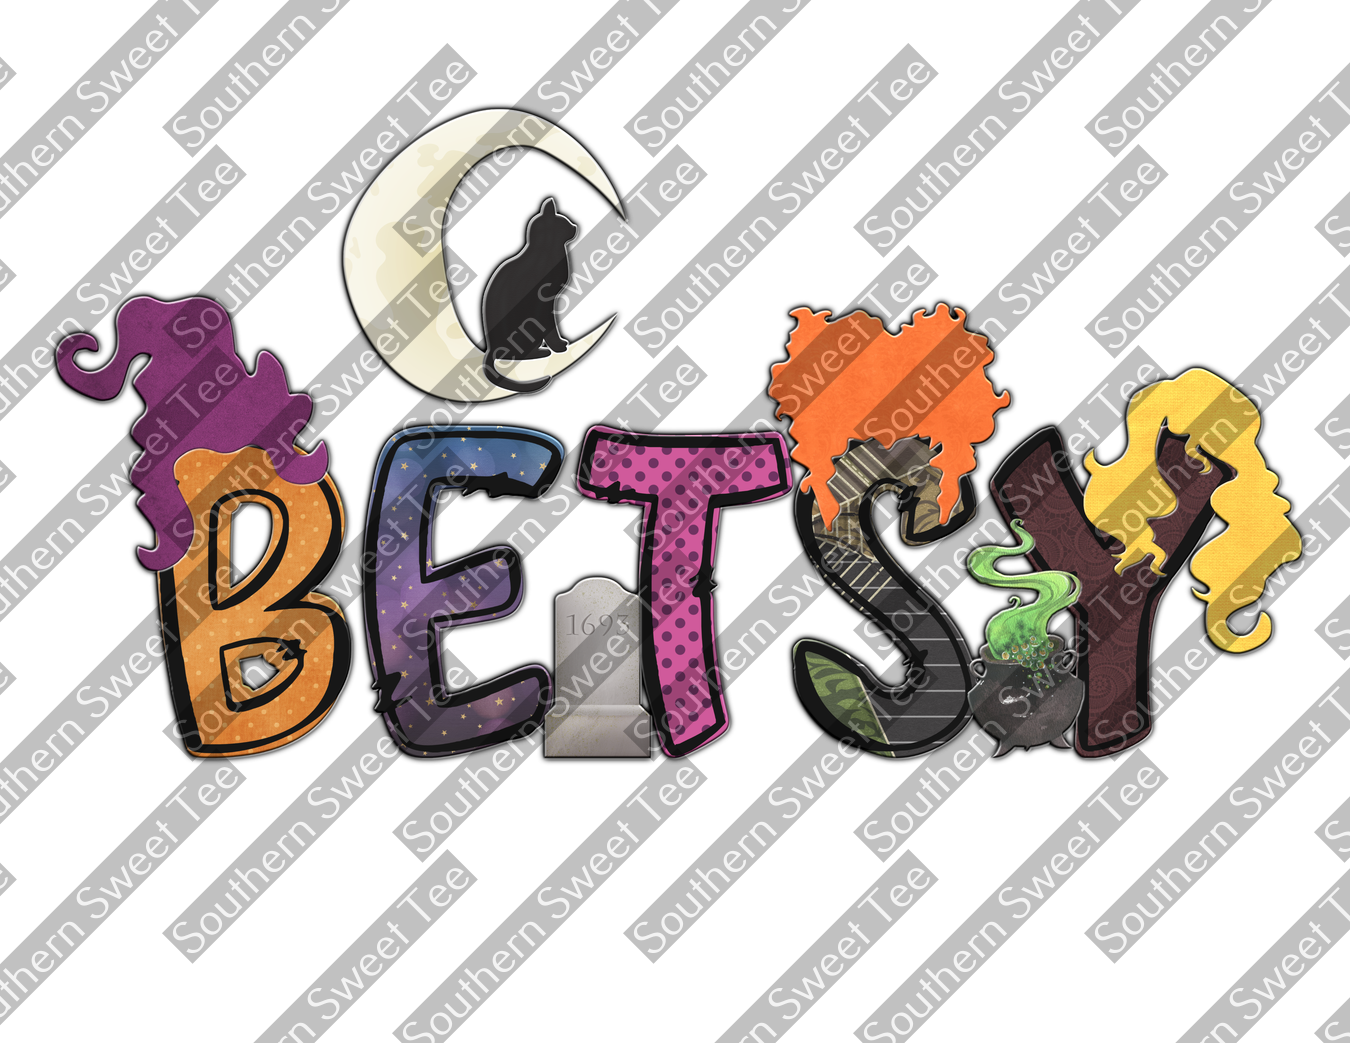 SAMPLE 3 WITCHES FONT .BNB